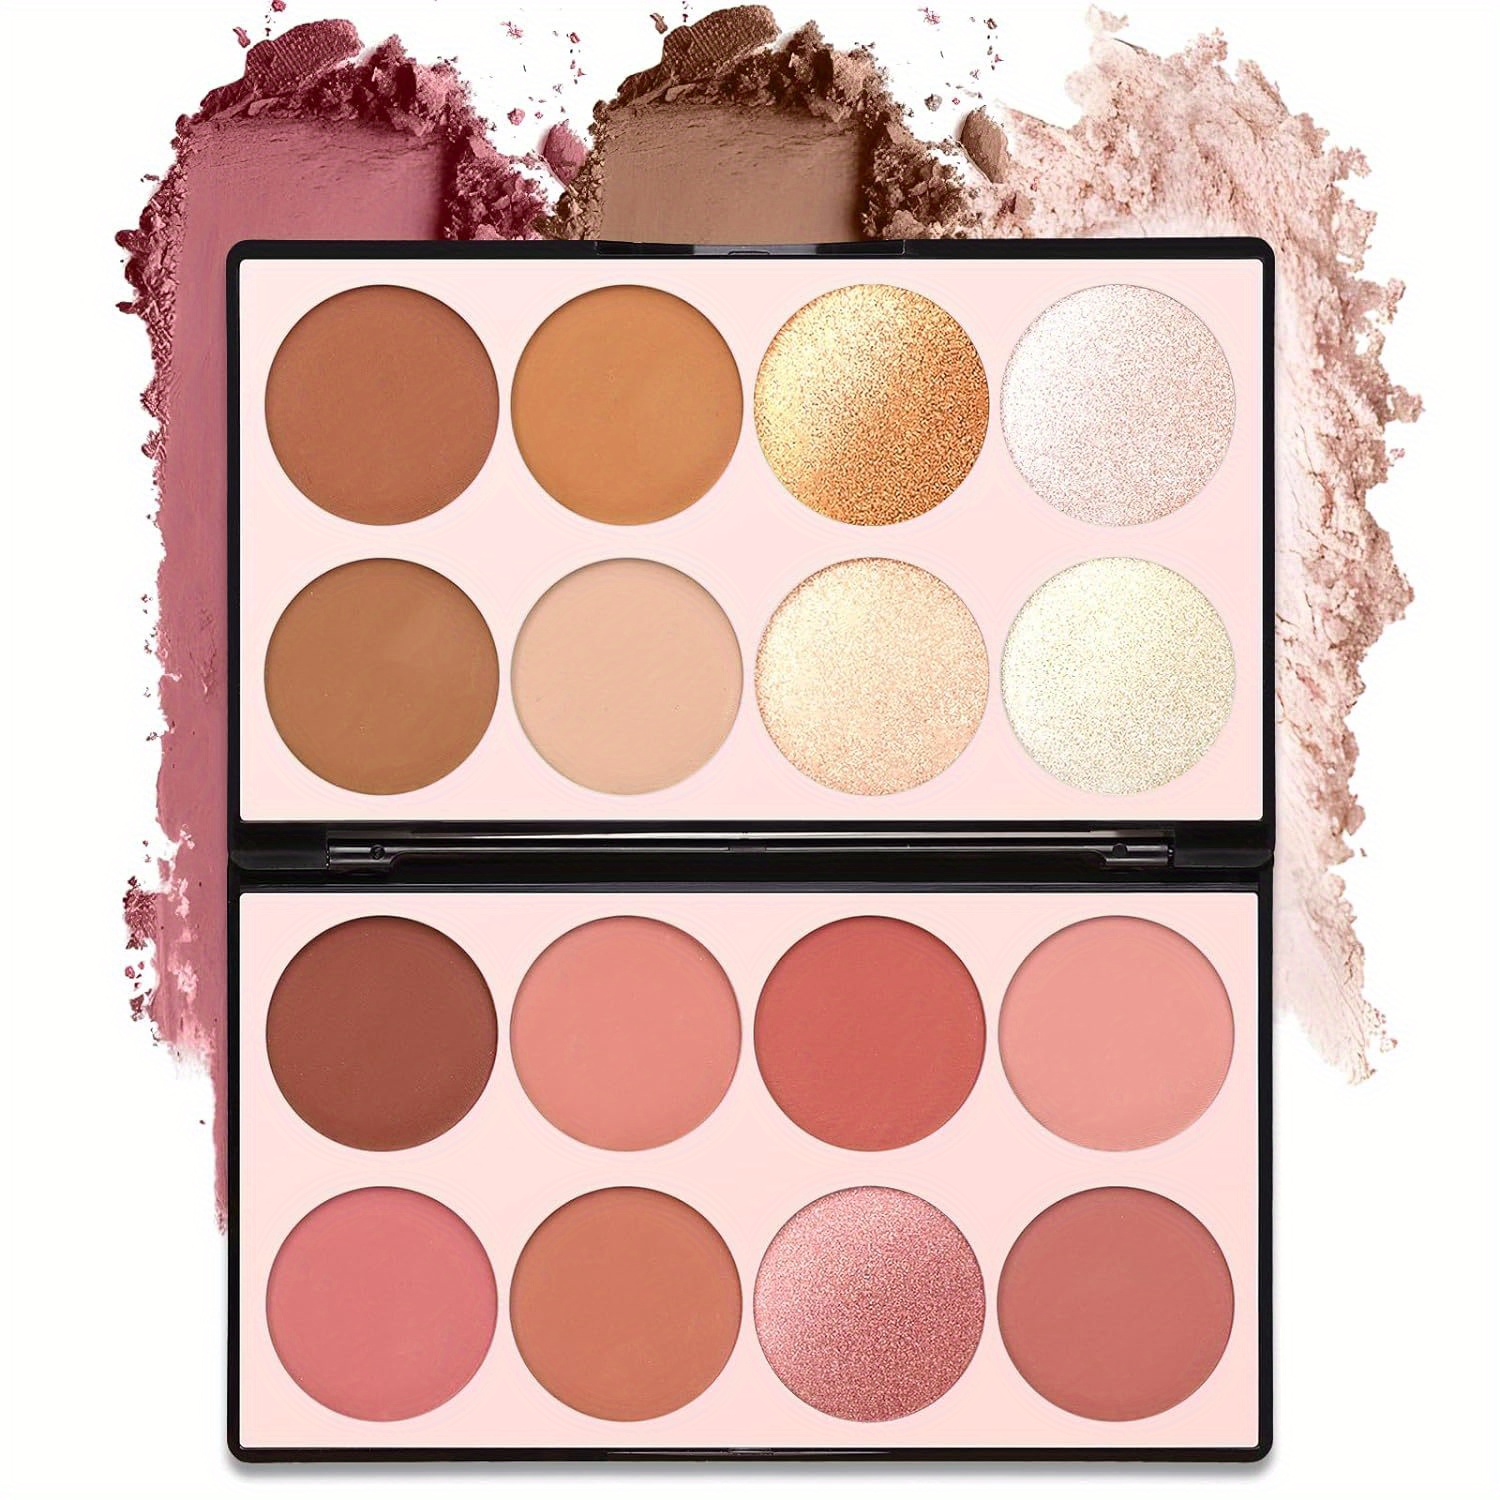 

16 Colors Contour Palette – All-in-one Makeup Kit With Blush, Highlighters, And Bronzer Powder – Versatile Face Contouring And Shading Set For Various Skin Tones